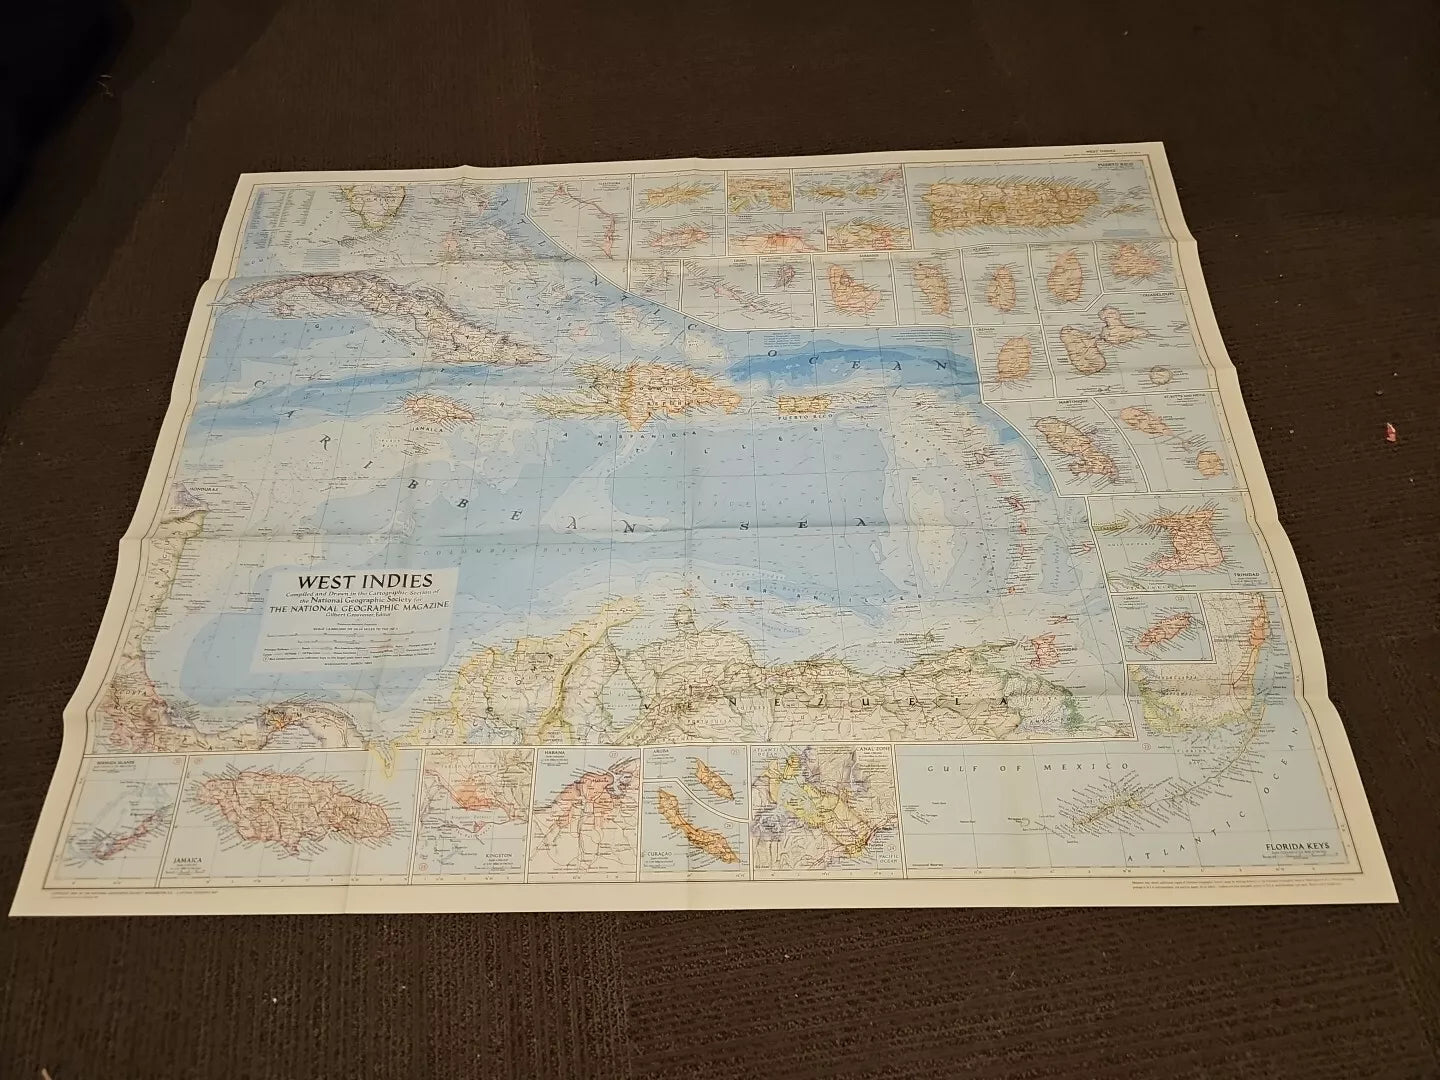 Vintage National Geographic Map - West Indies (1954)